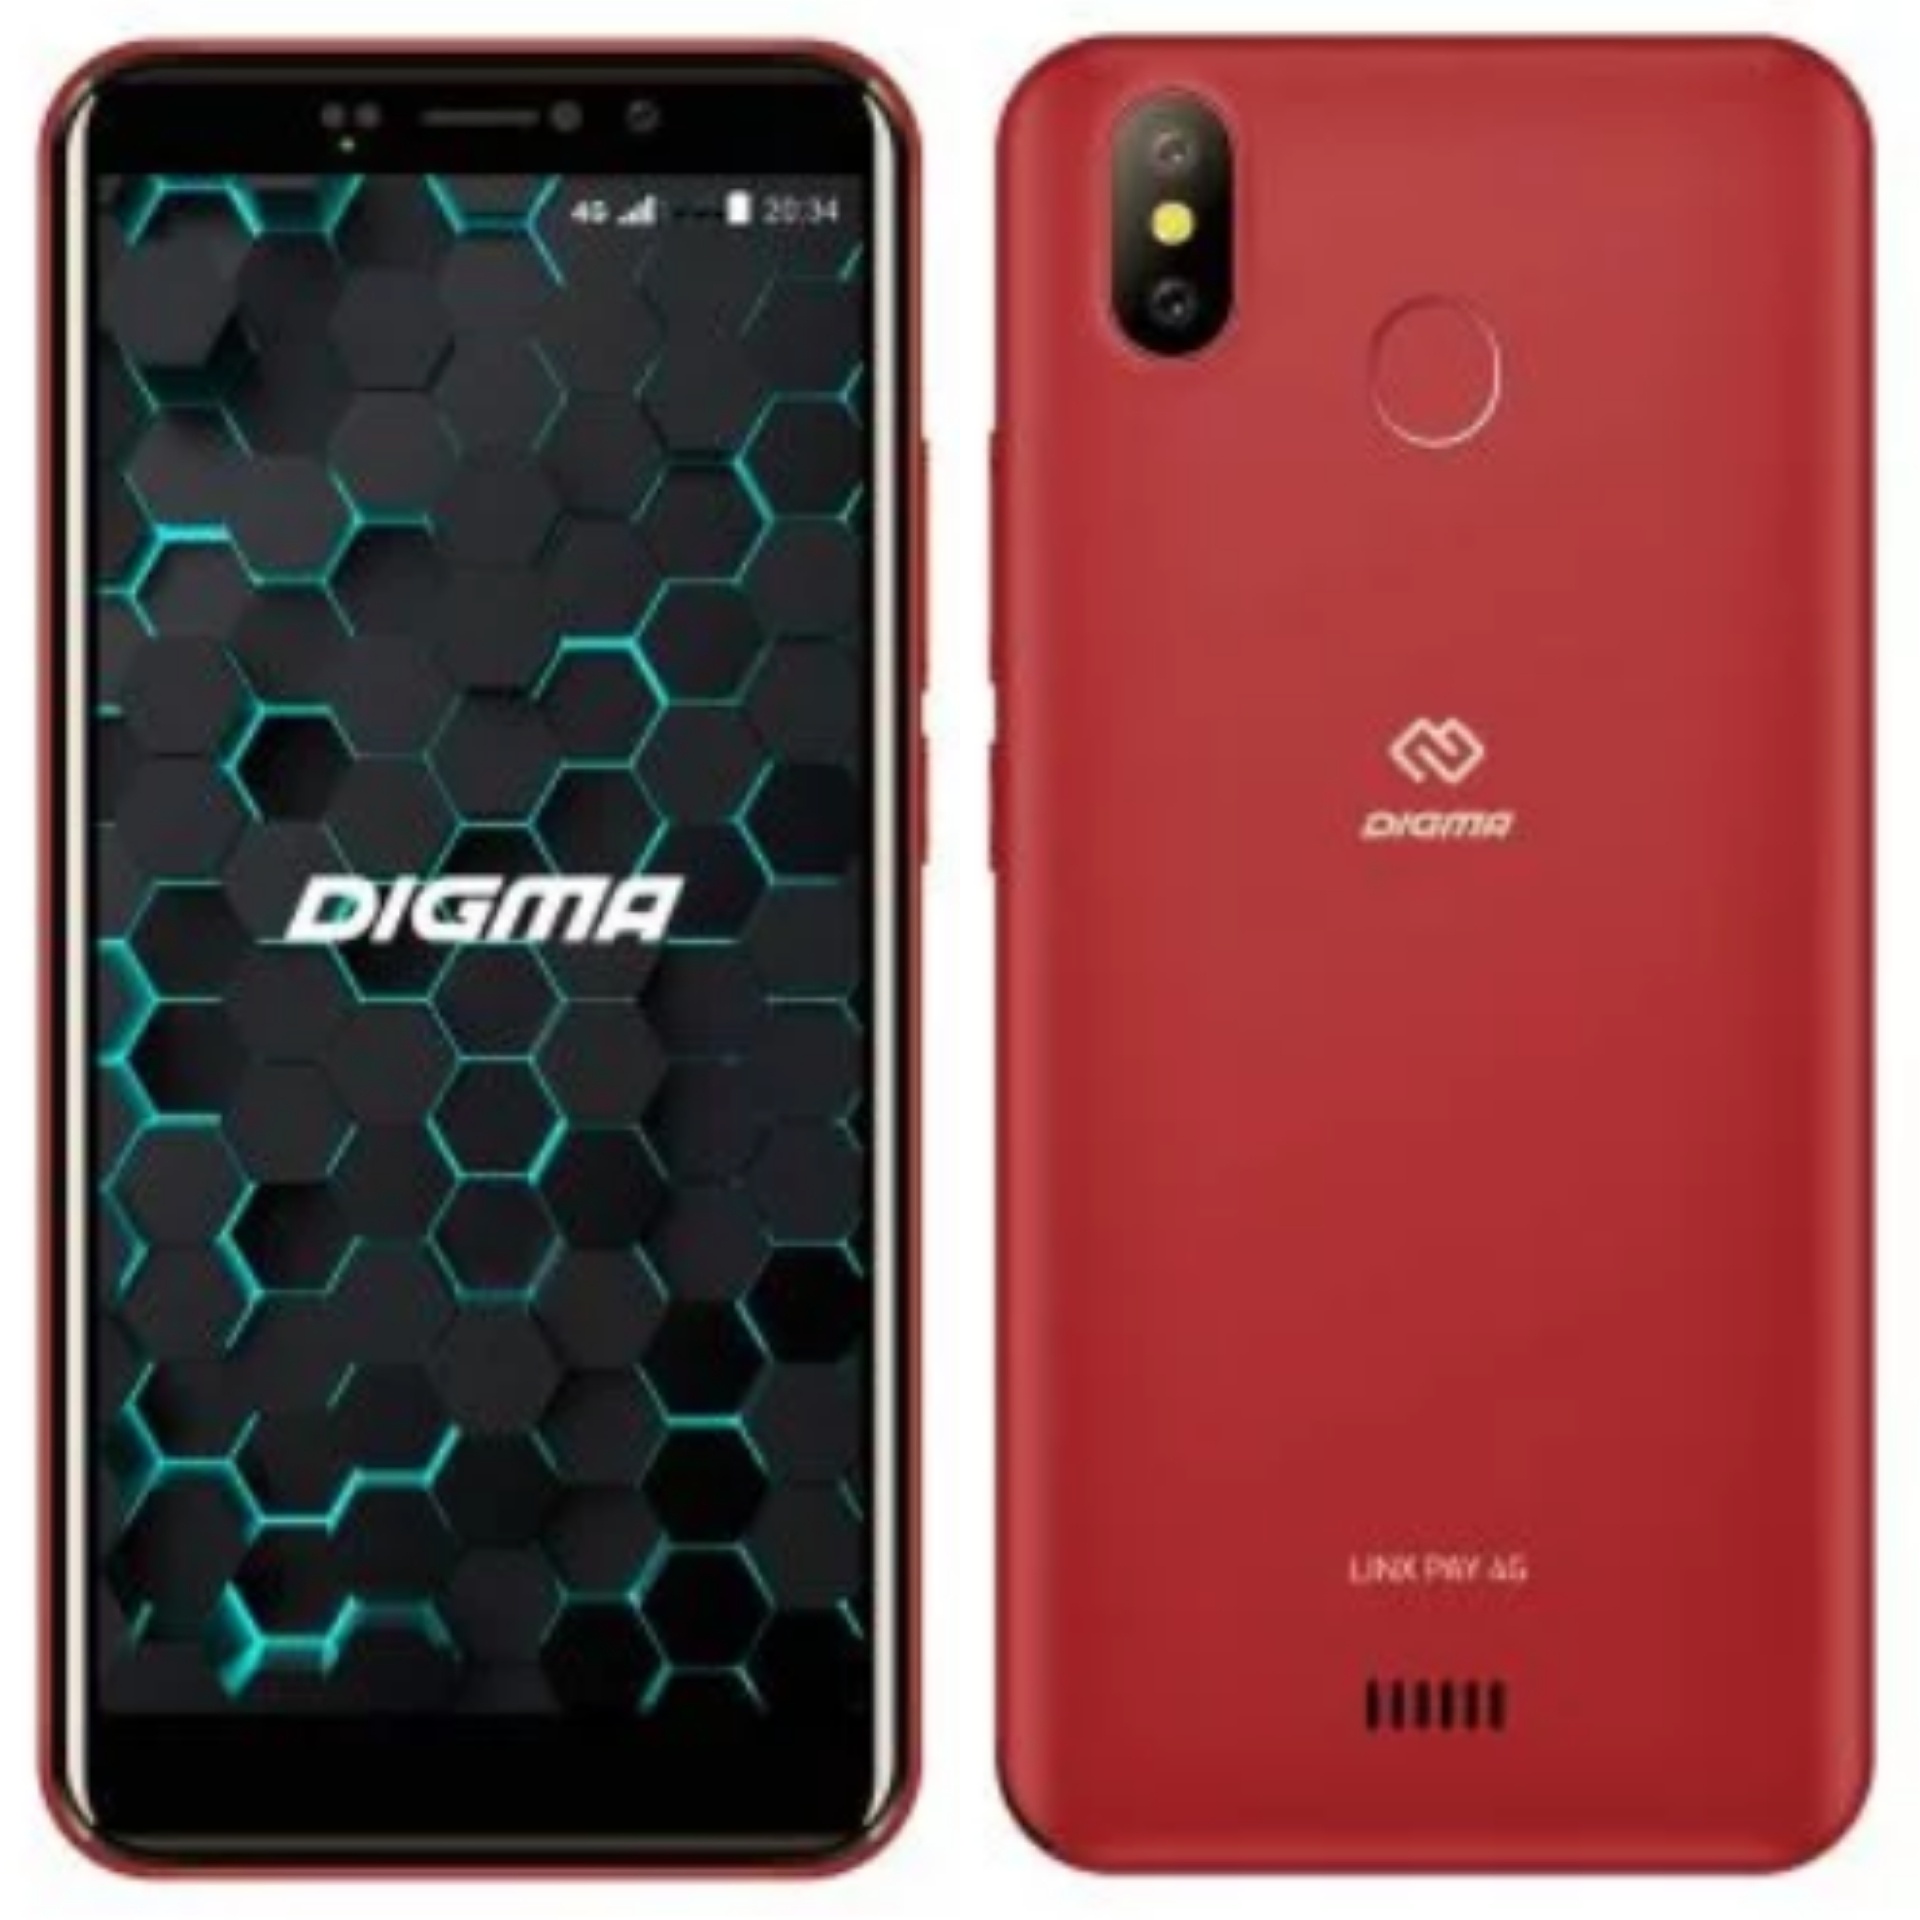 Digma Linx Pay 4G Specs, Video Review and Price - Mobile ...